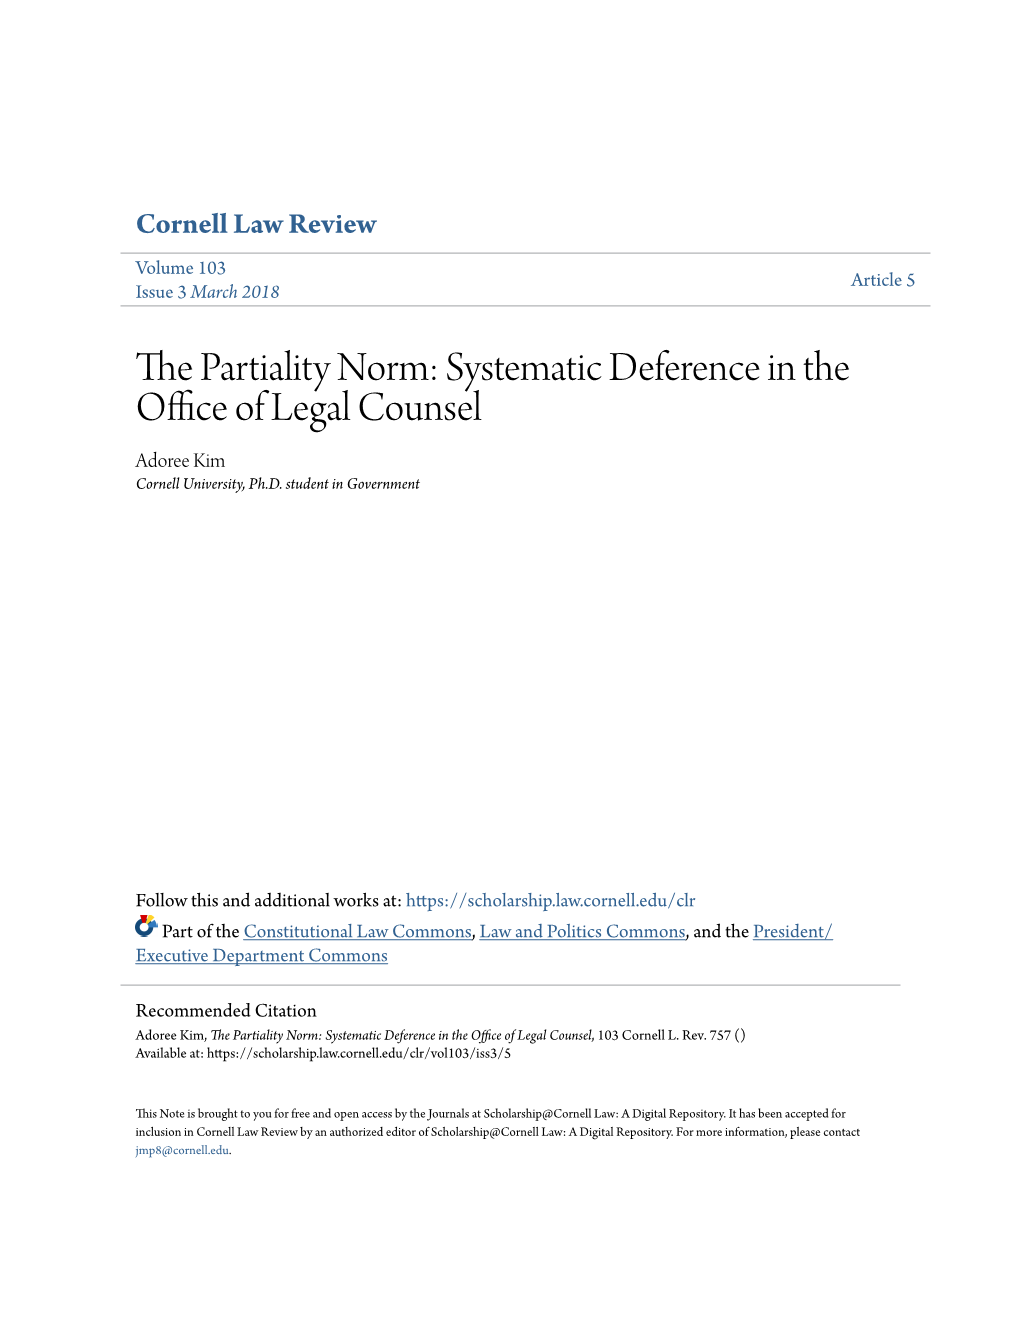 The Partiality Norm: Systematic Deference in the Office of Legal Counsel